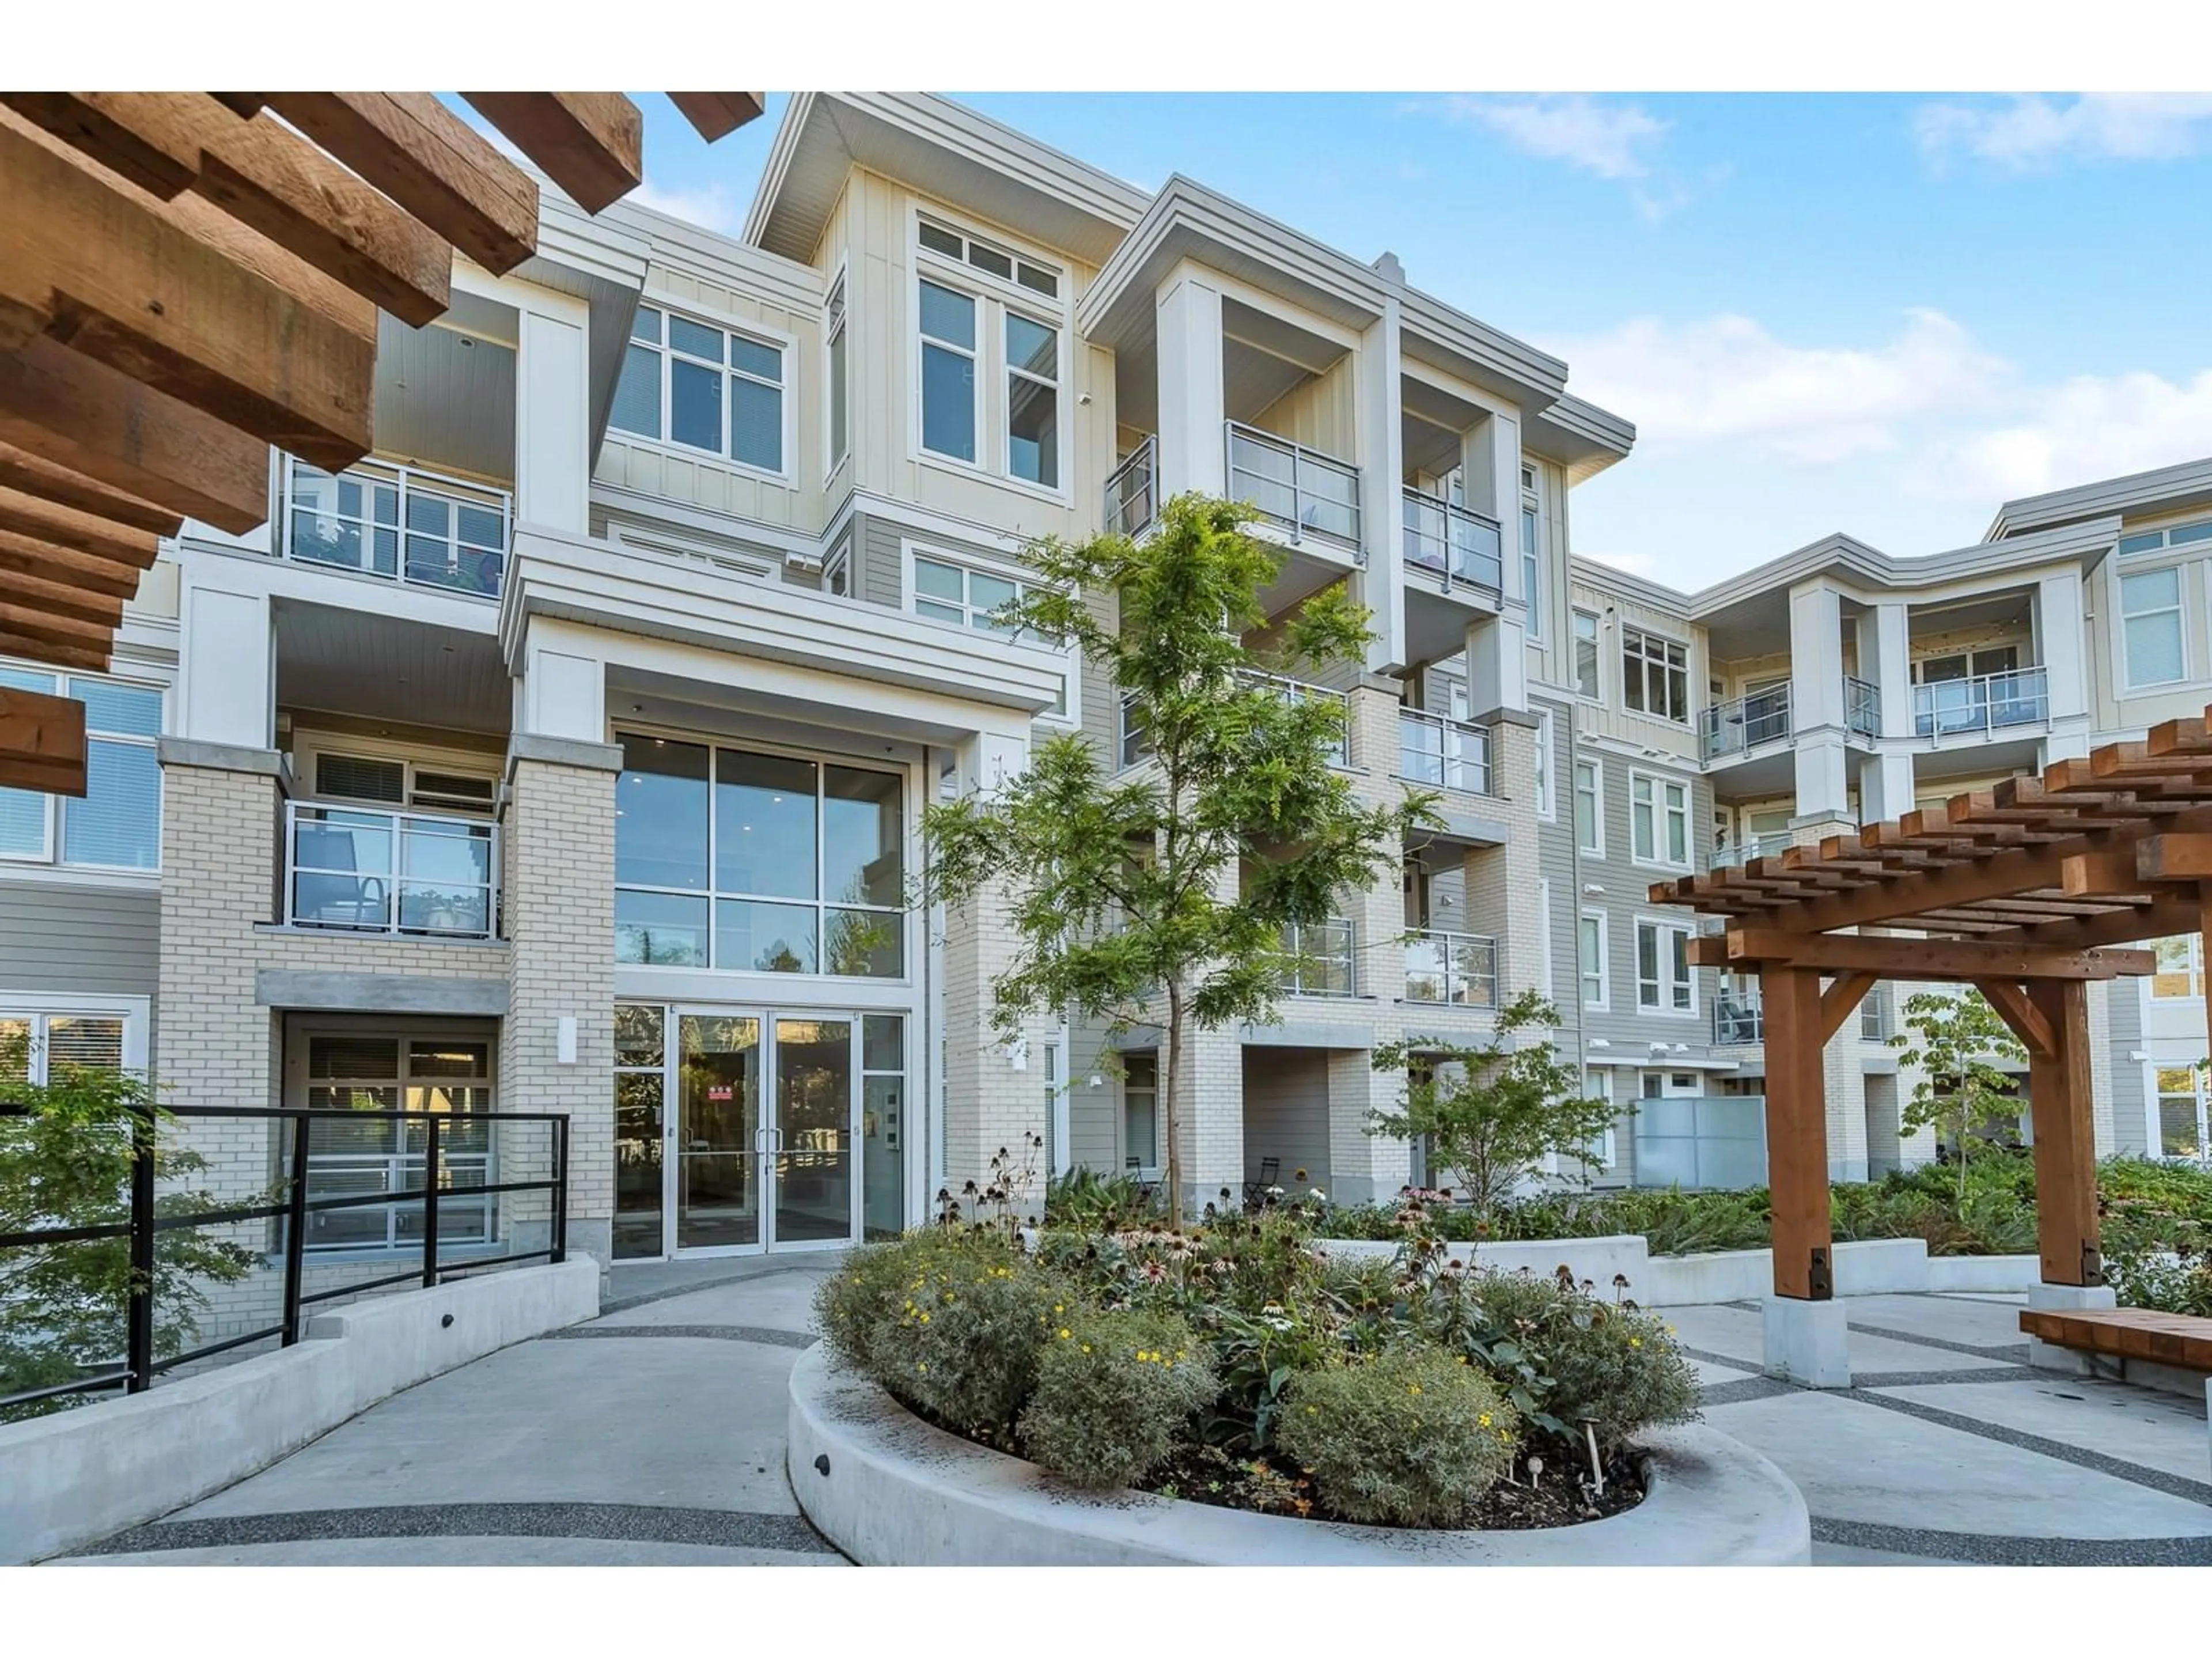 A pic from exterior of the house or condo for 409 15436 31 AVENUE, Surrey British Columbia V3Z1H3